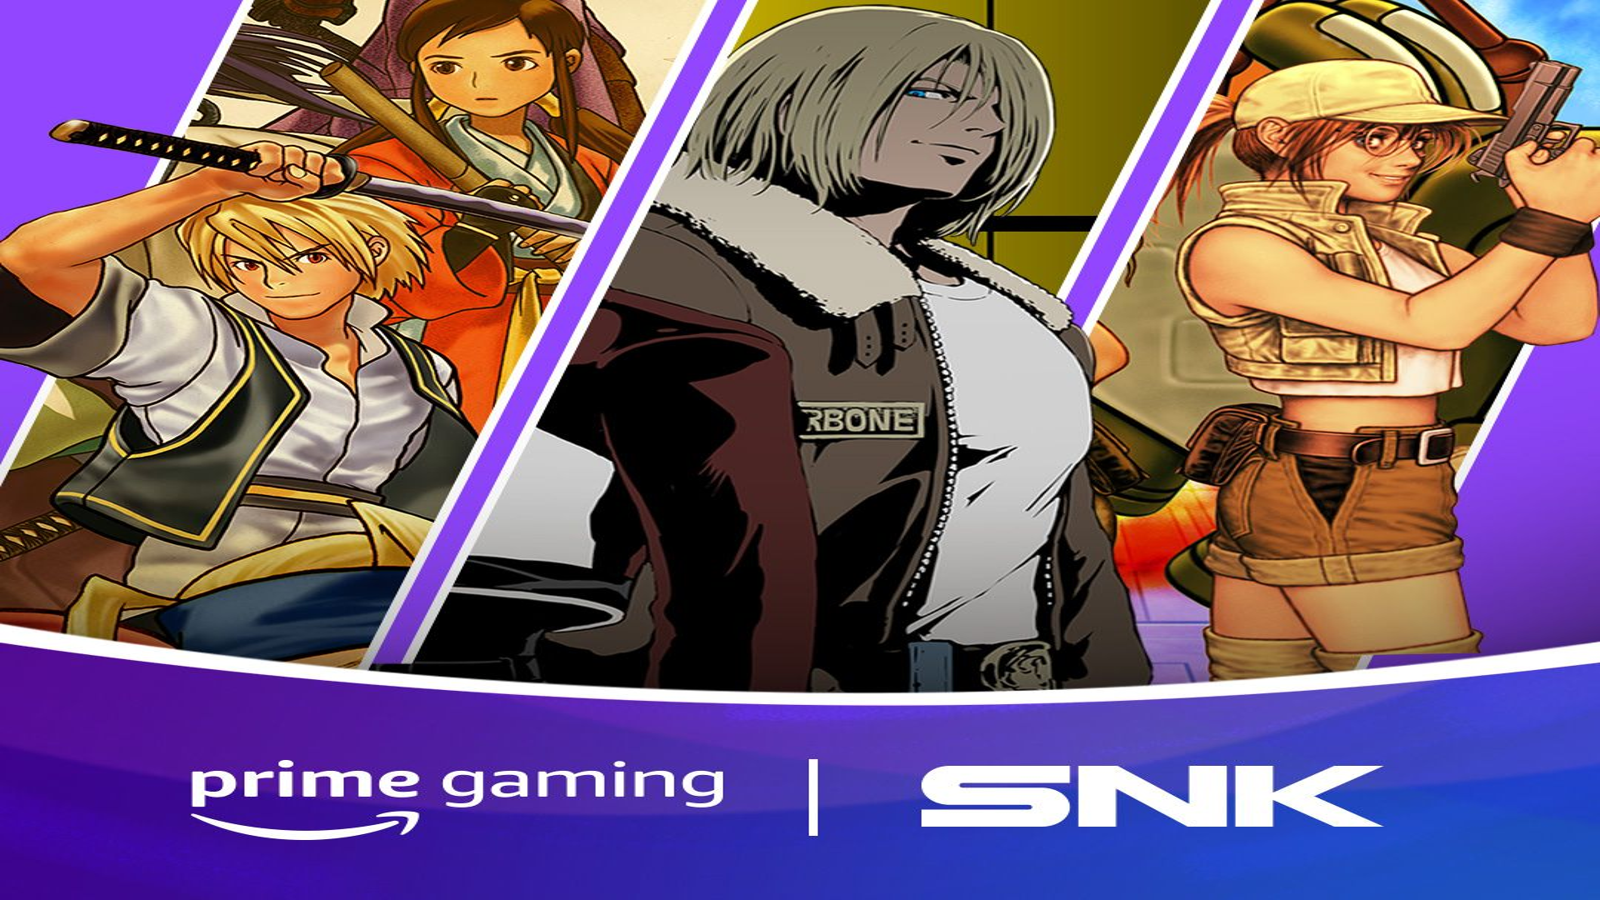 Final lineup of SNK games on  Prime Gaming announced